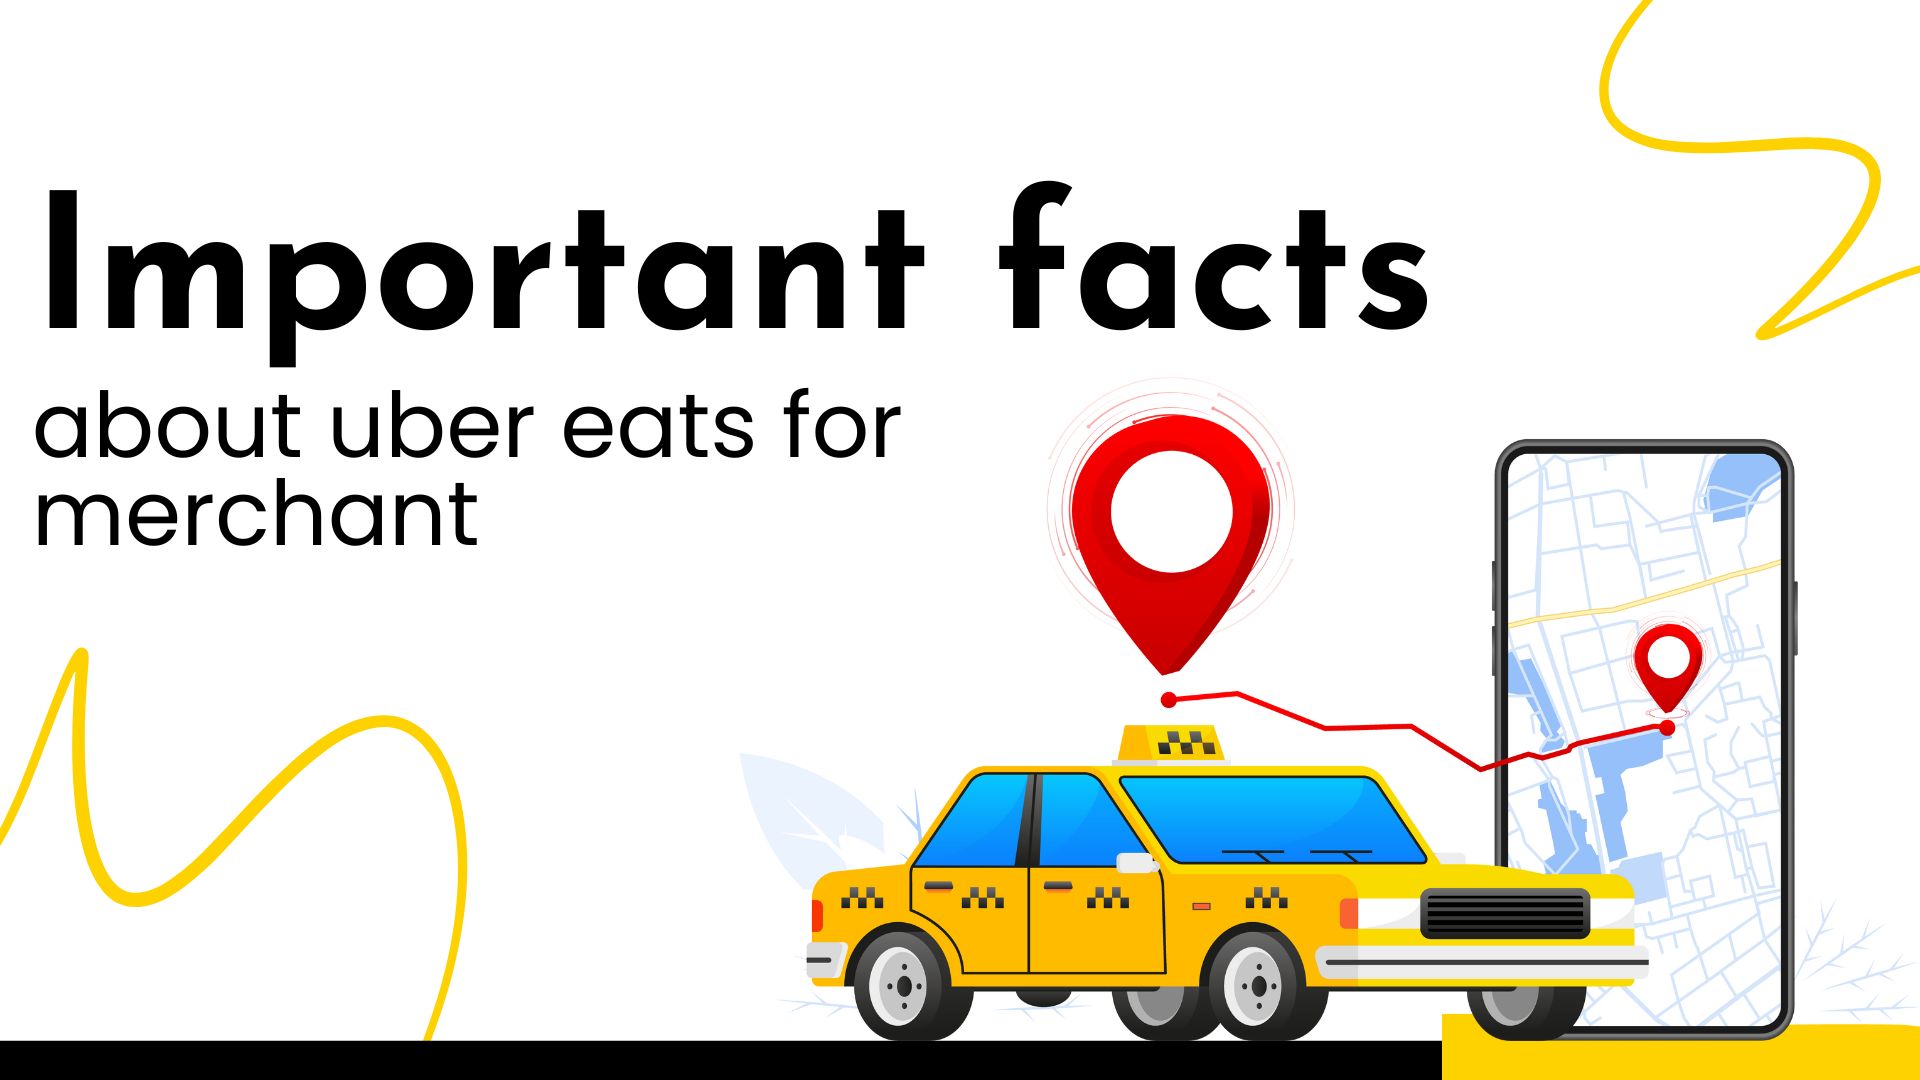 Important facts about uber eats for merchant